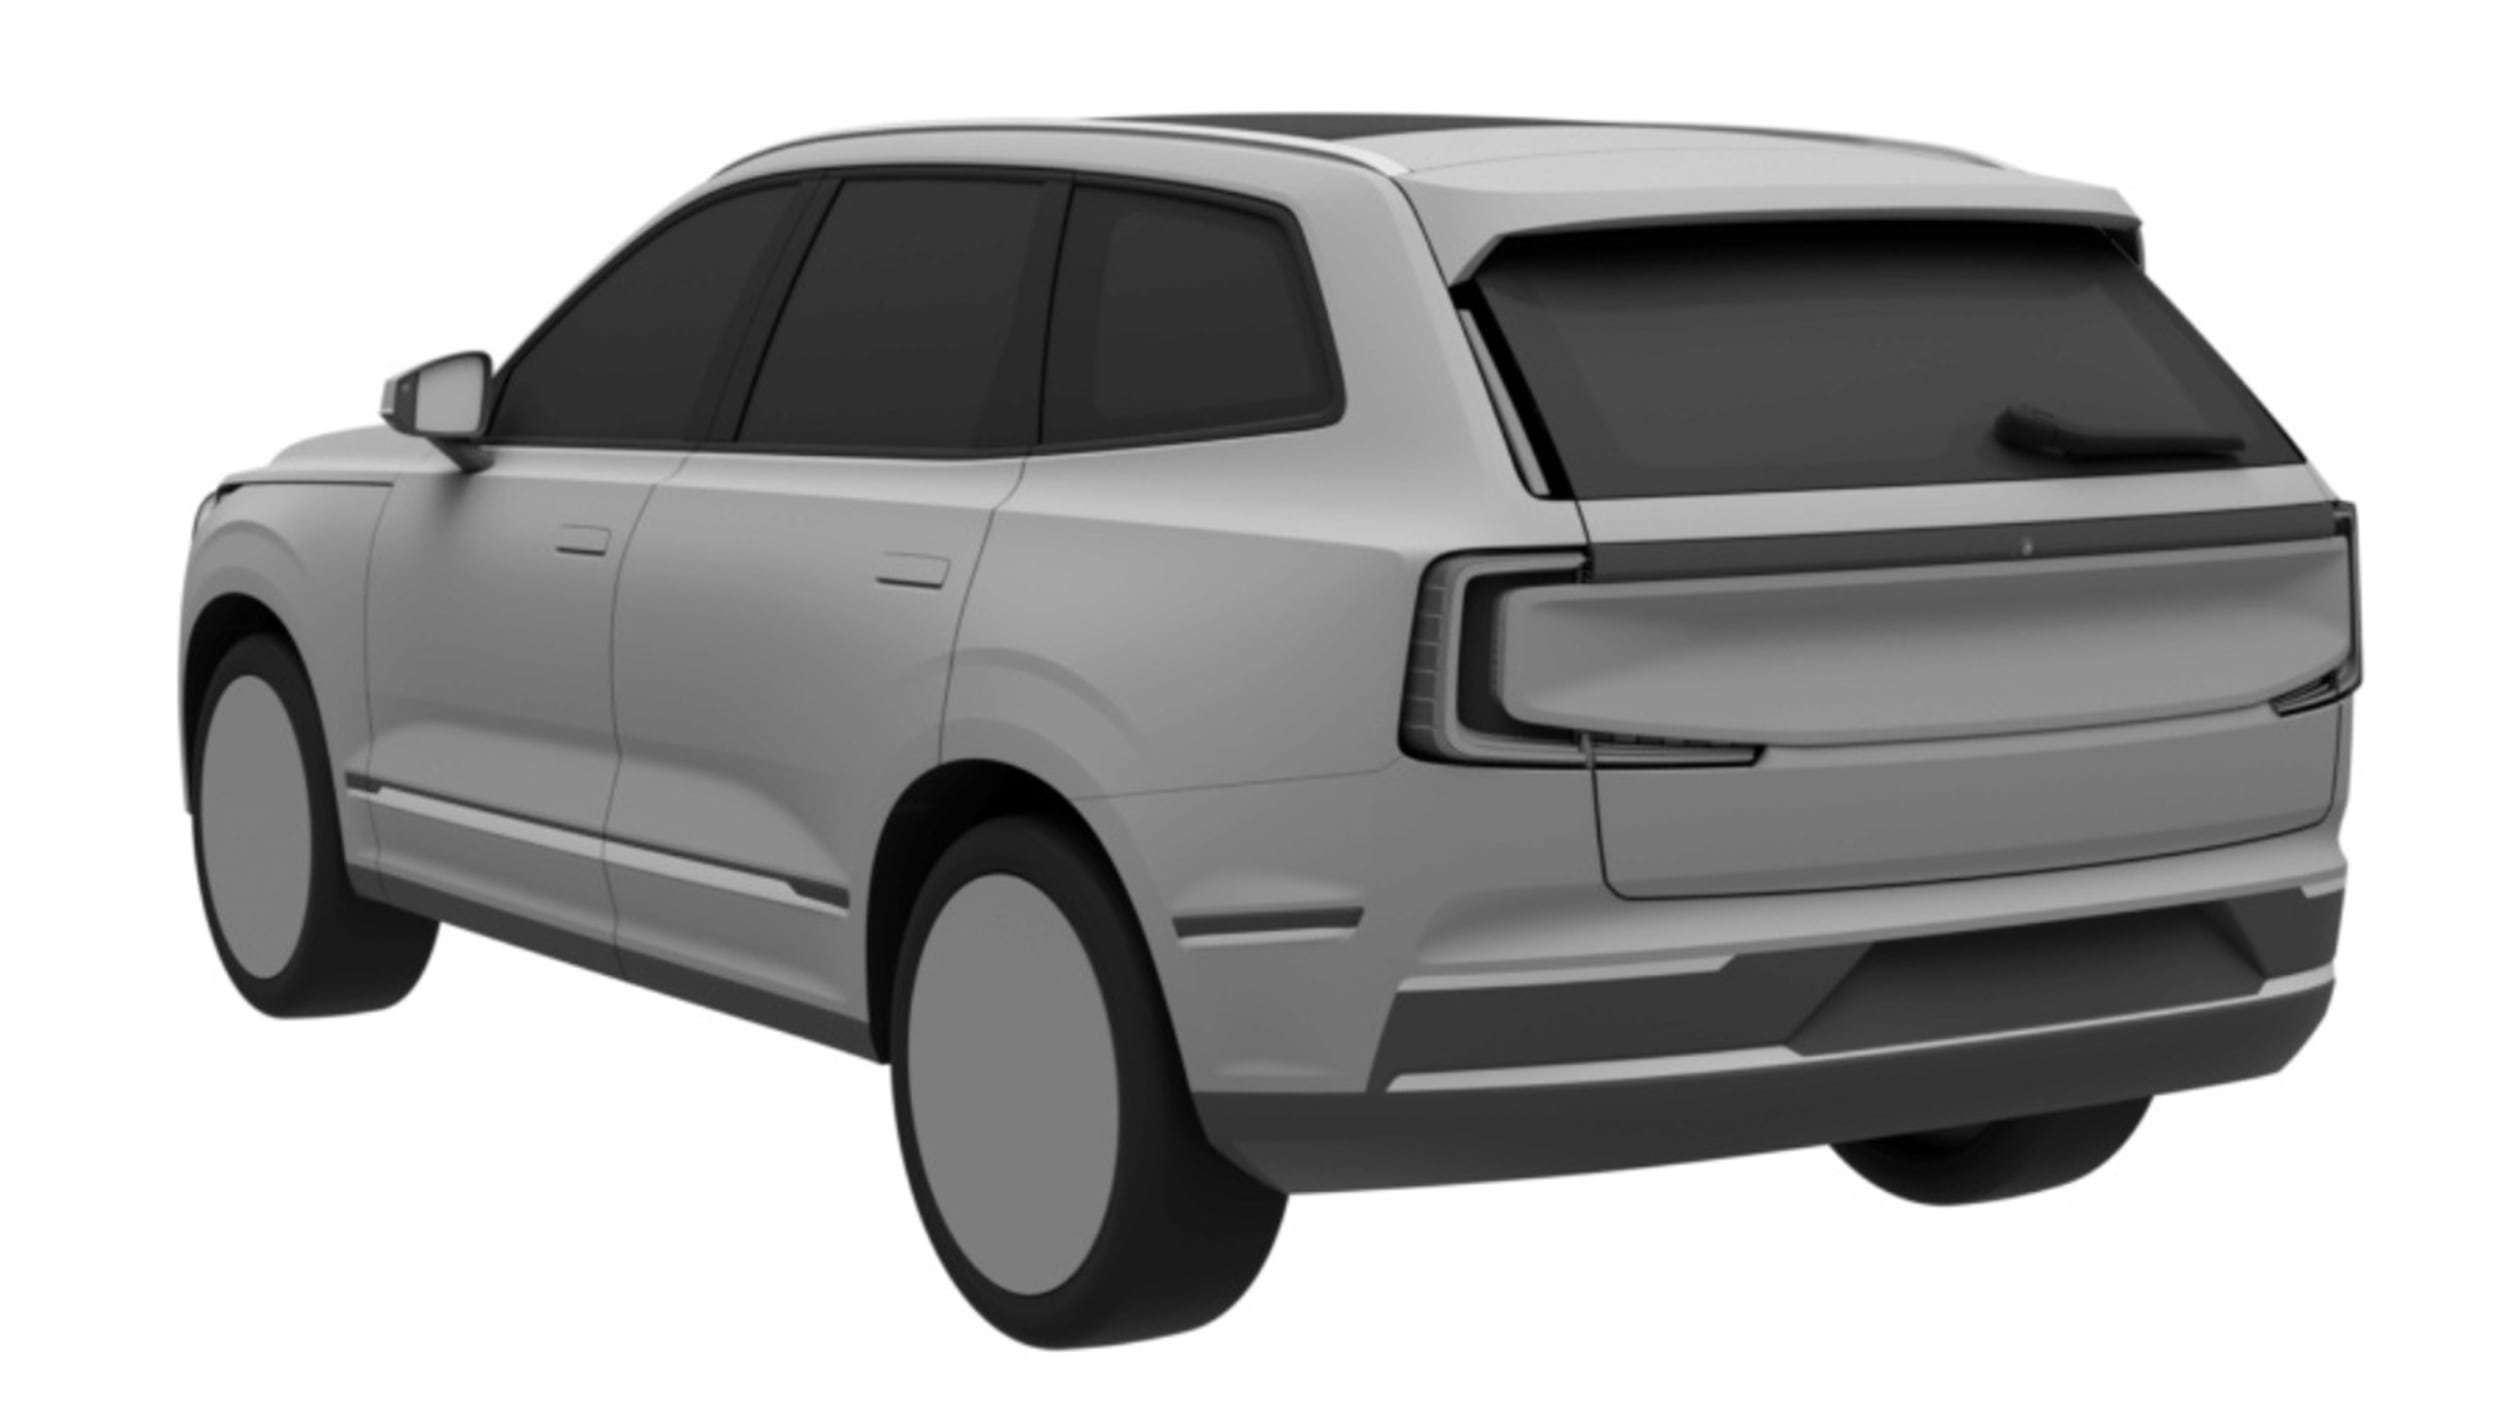 Volvo EXC90 patent image - rear angle